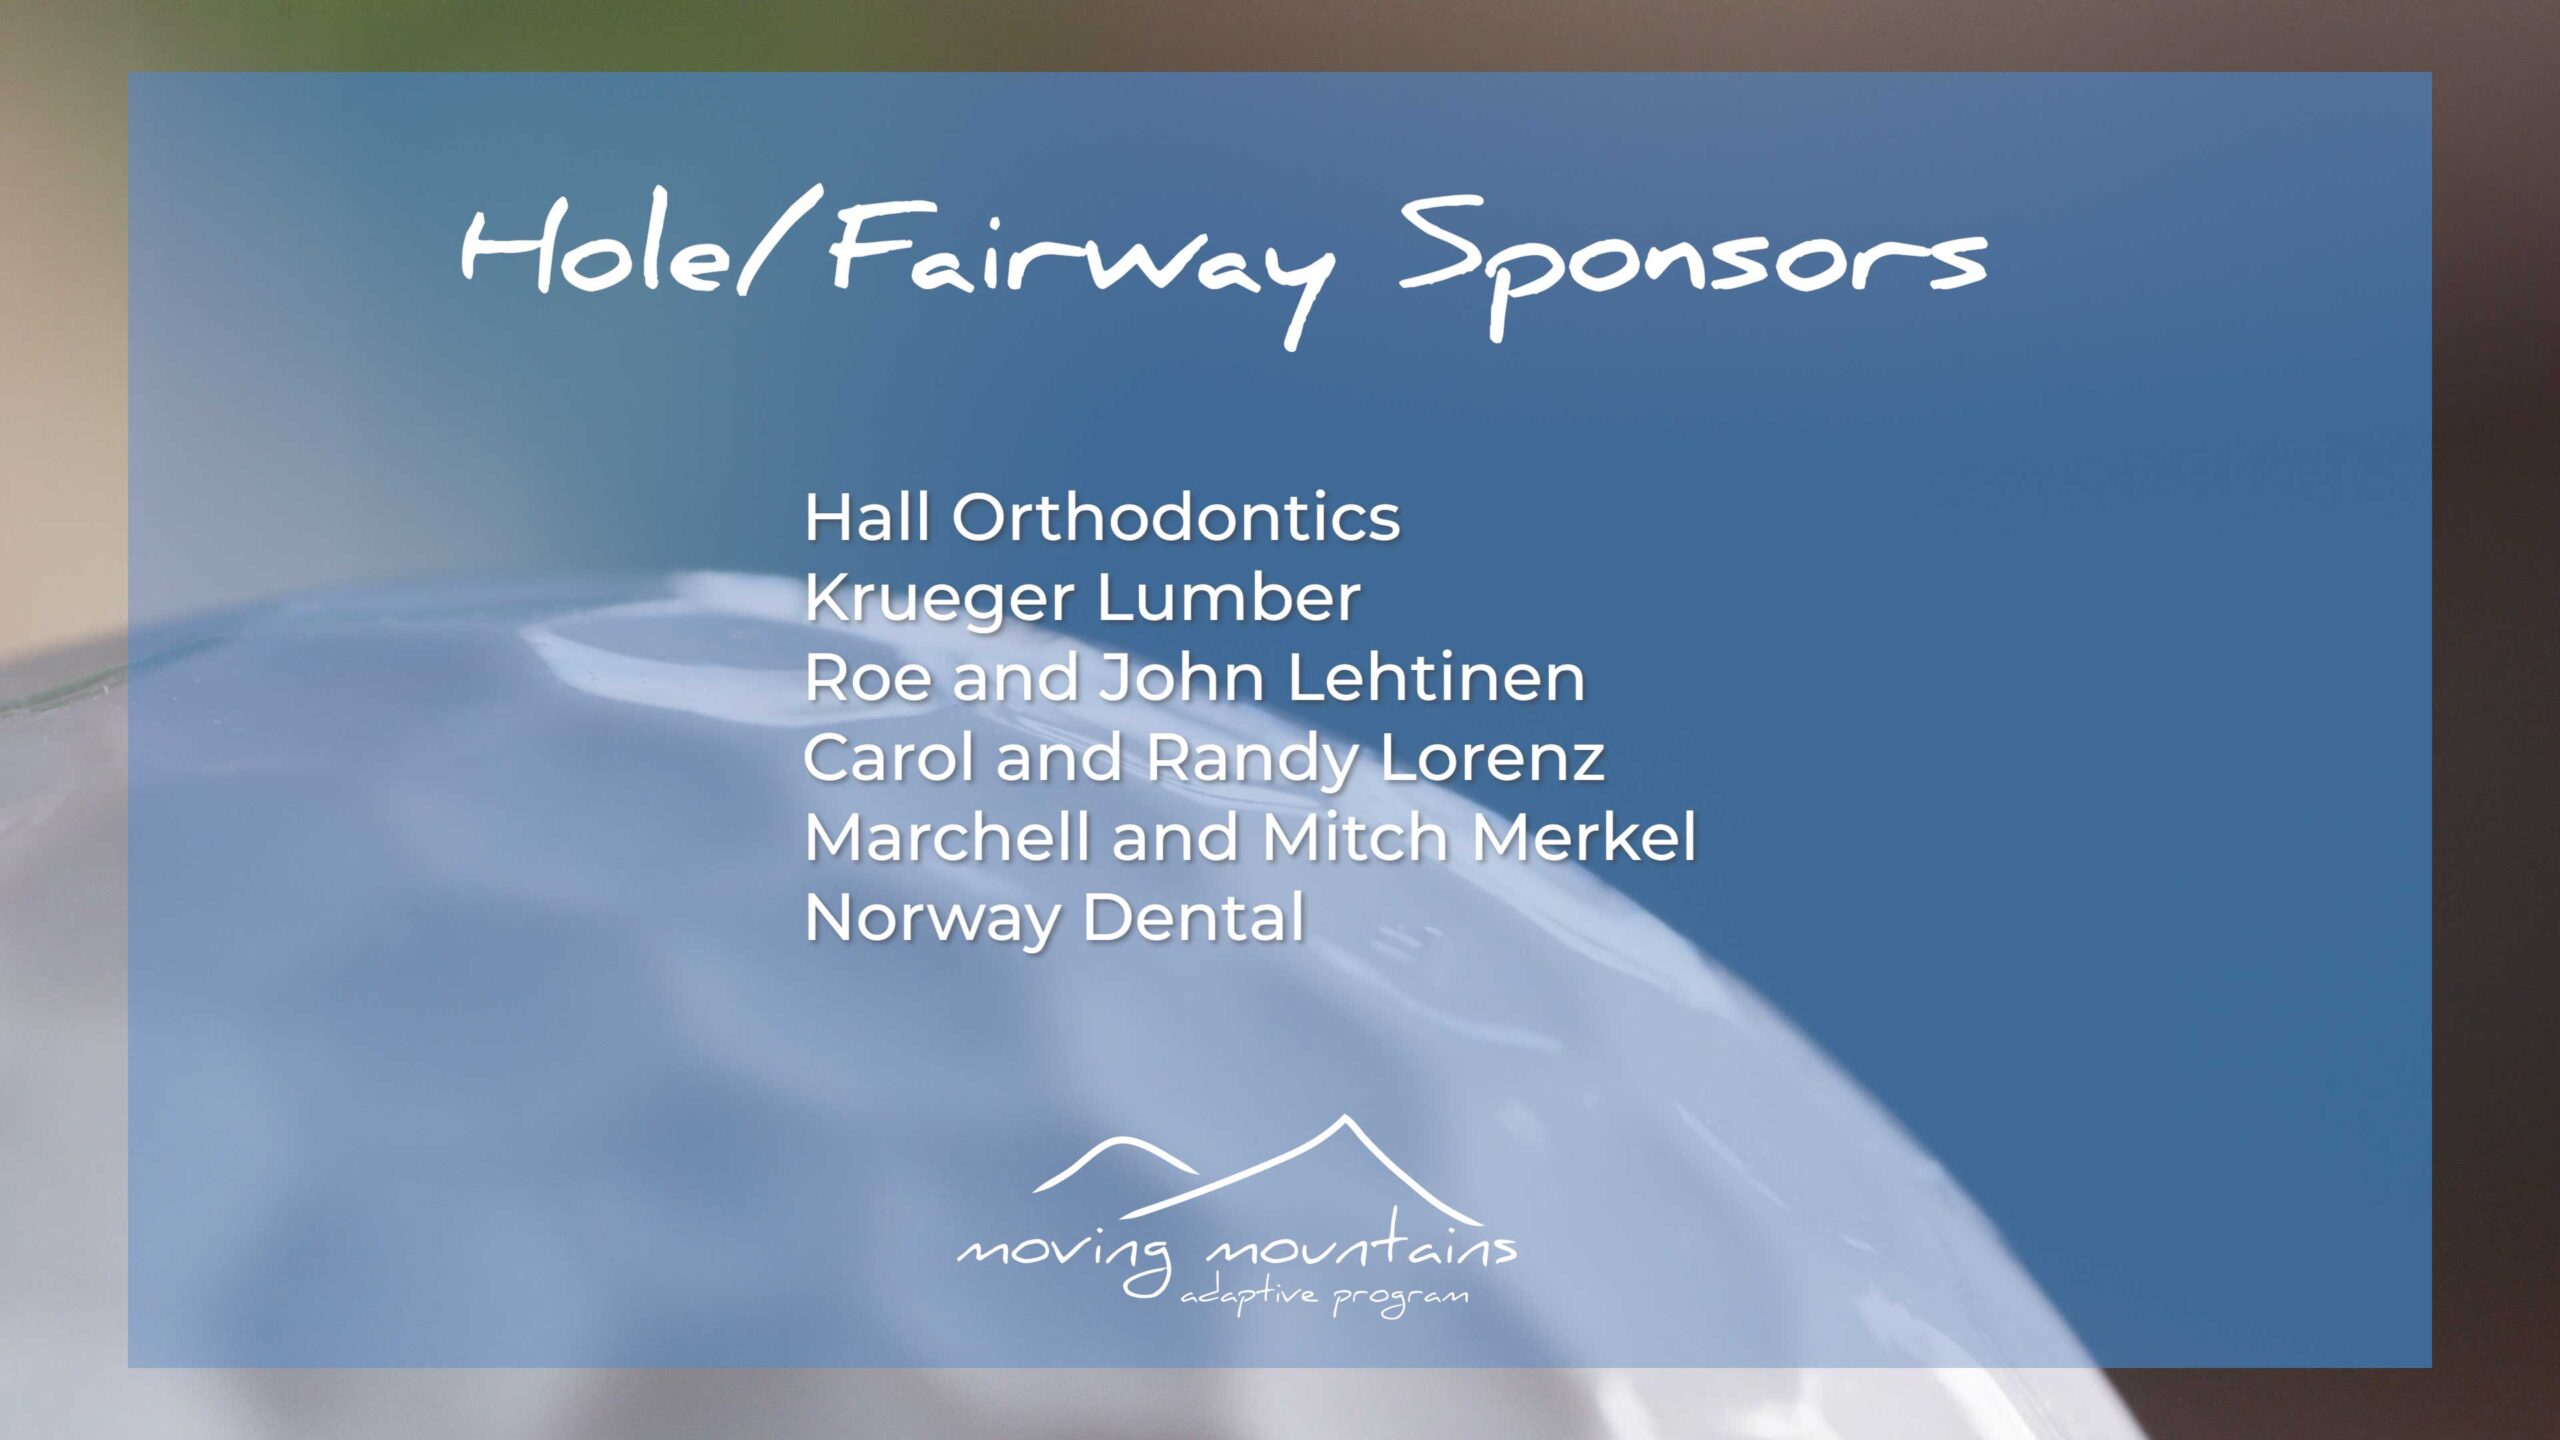 2023 Golf Outing Hole & Fairway Sponsors